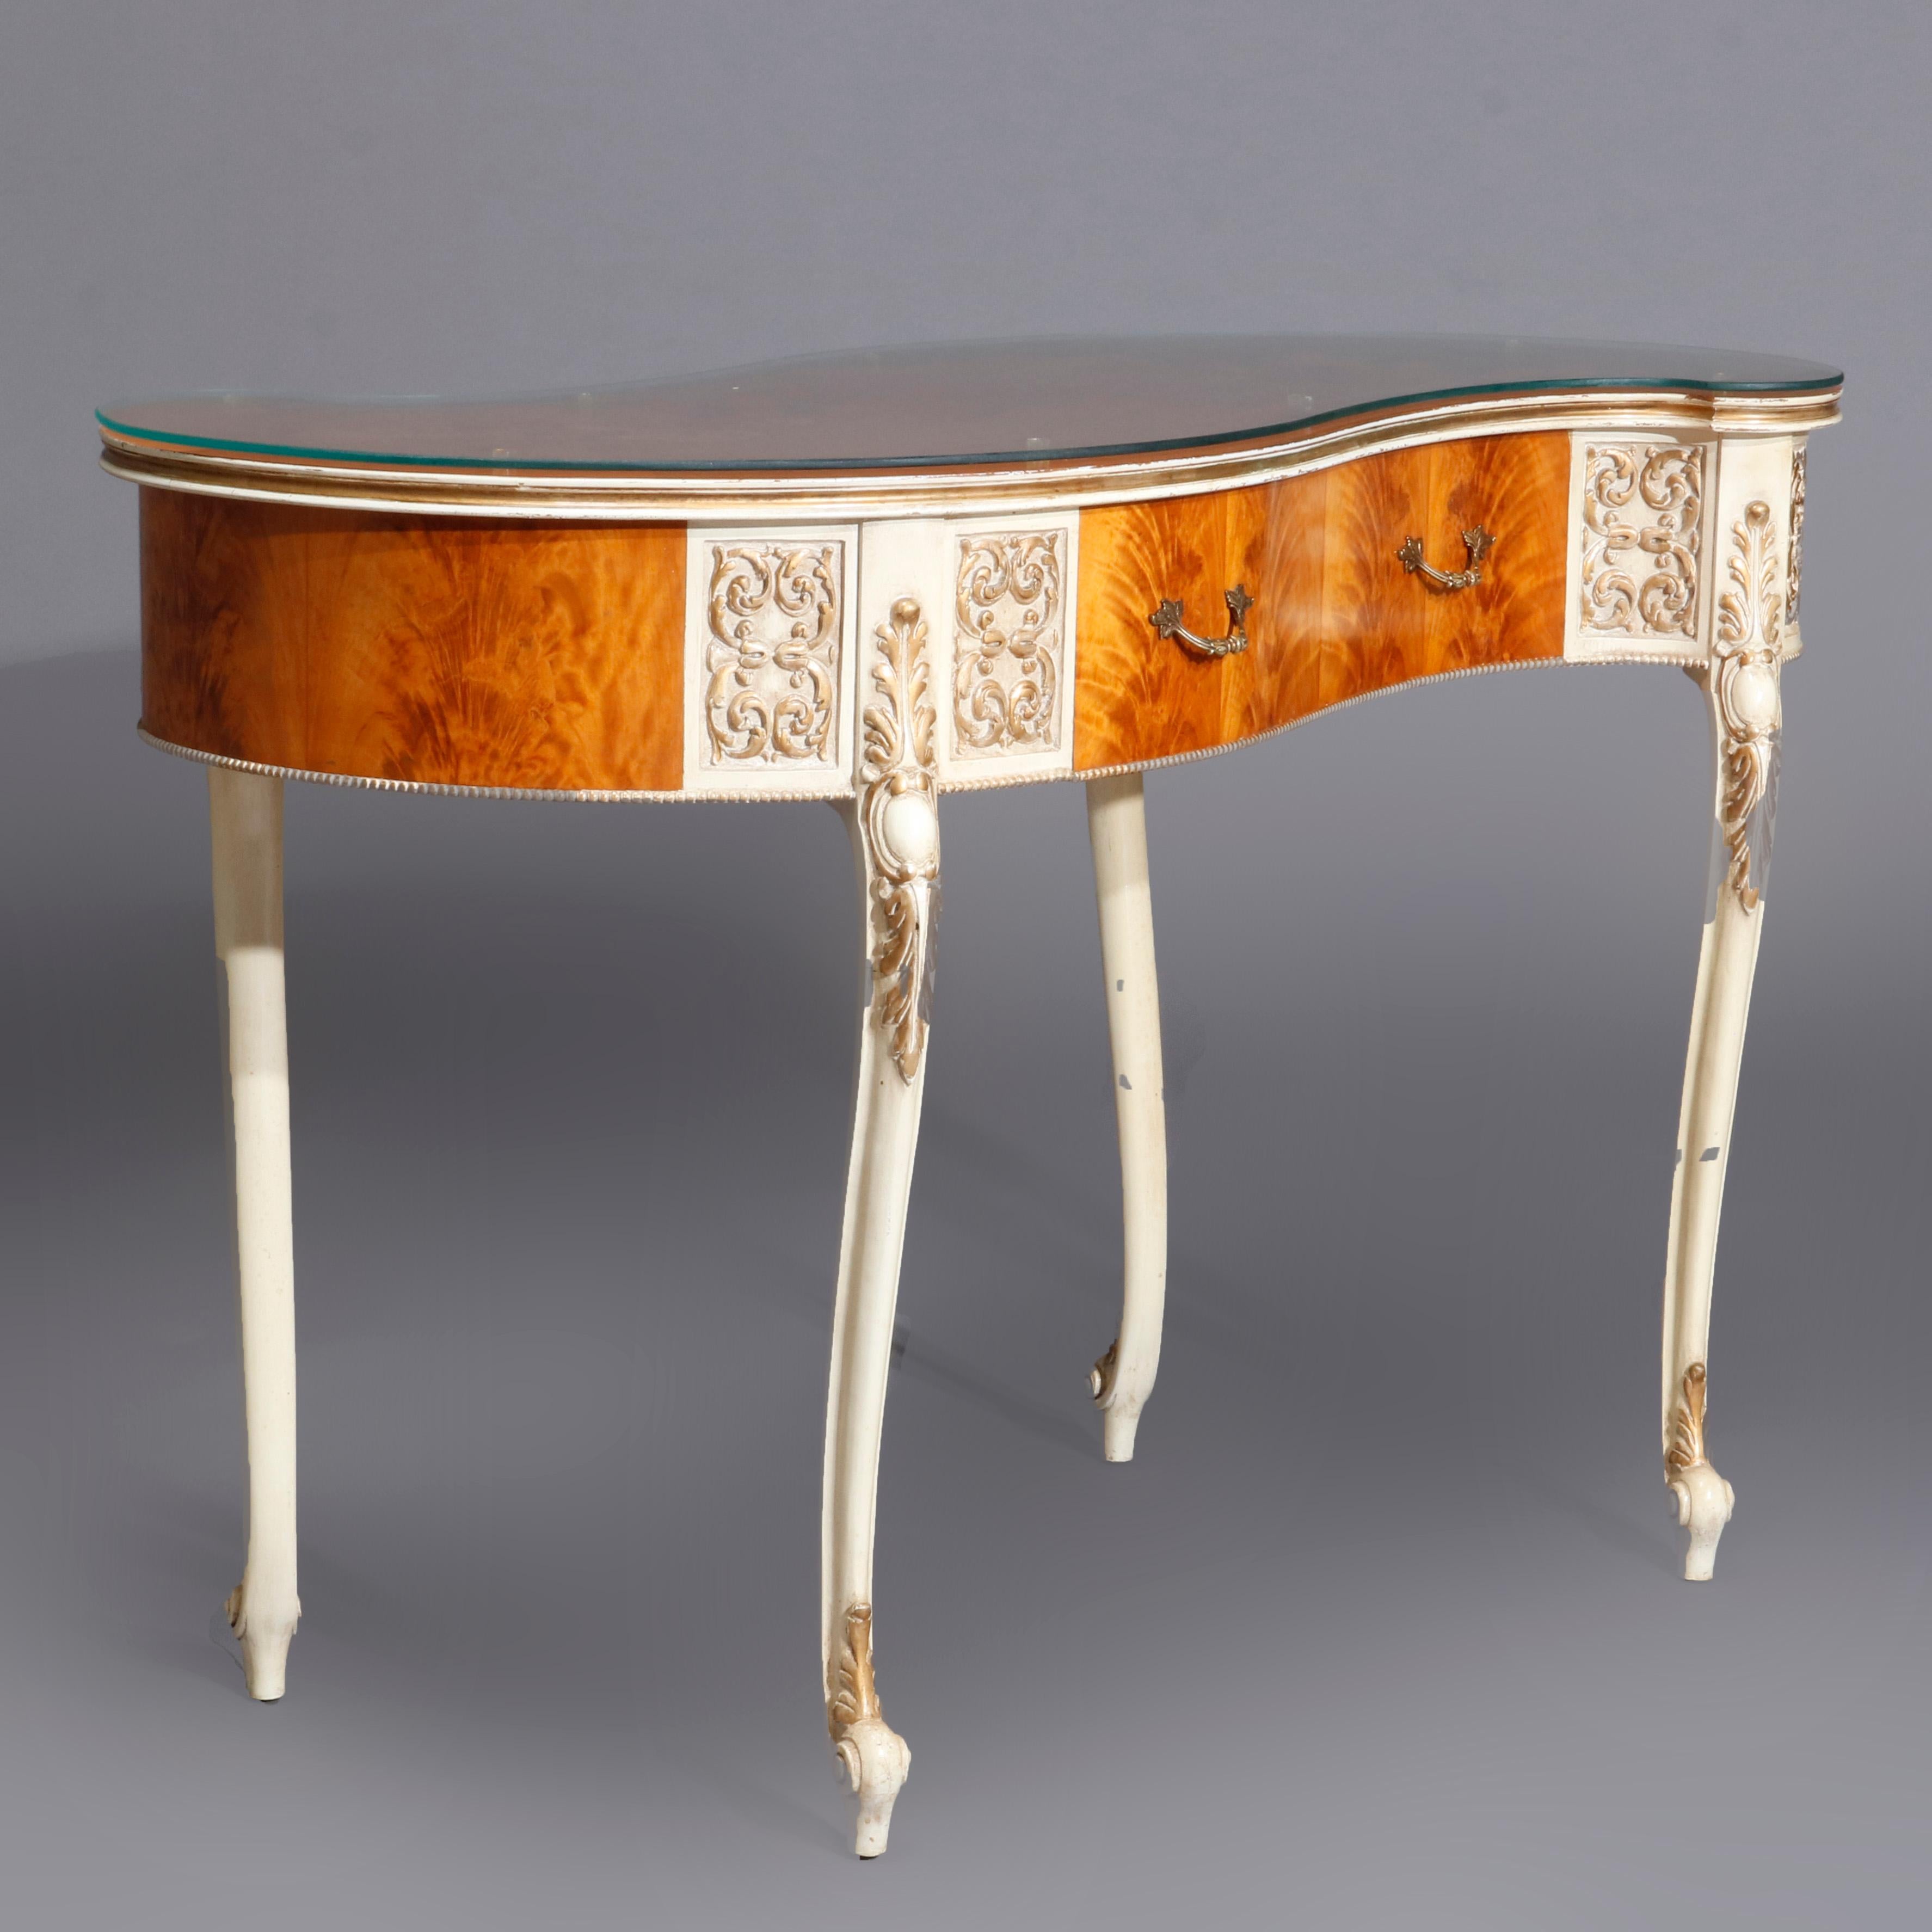 An antique French Louis XIV style ladies desk offers kidney form with satinwood marquetry case having floral inlaid writing surface with crossbanded framing, single drawer and painted elements having gilt scroll decoration, raised on cabriole legs